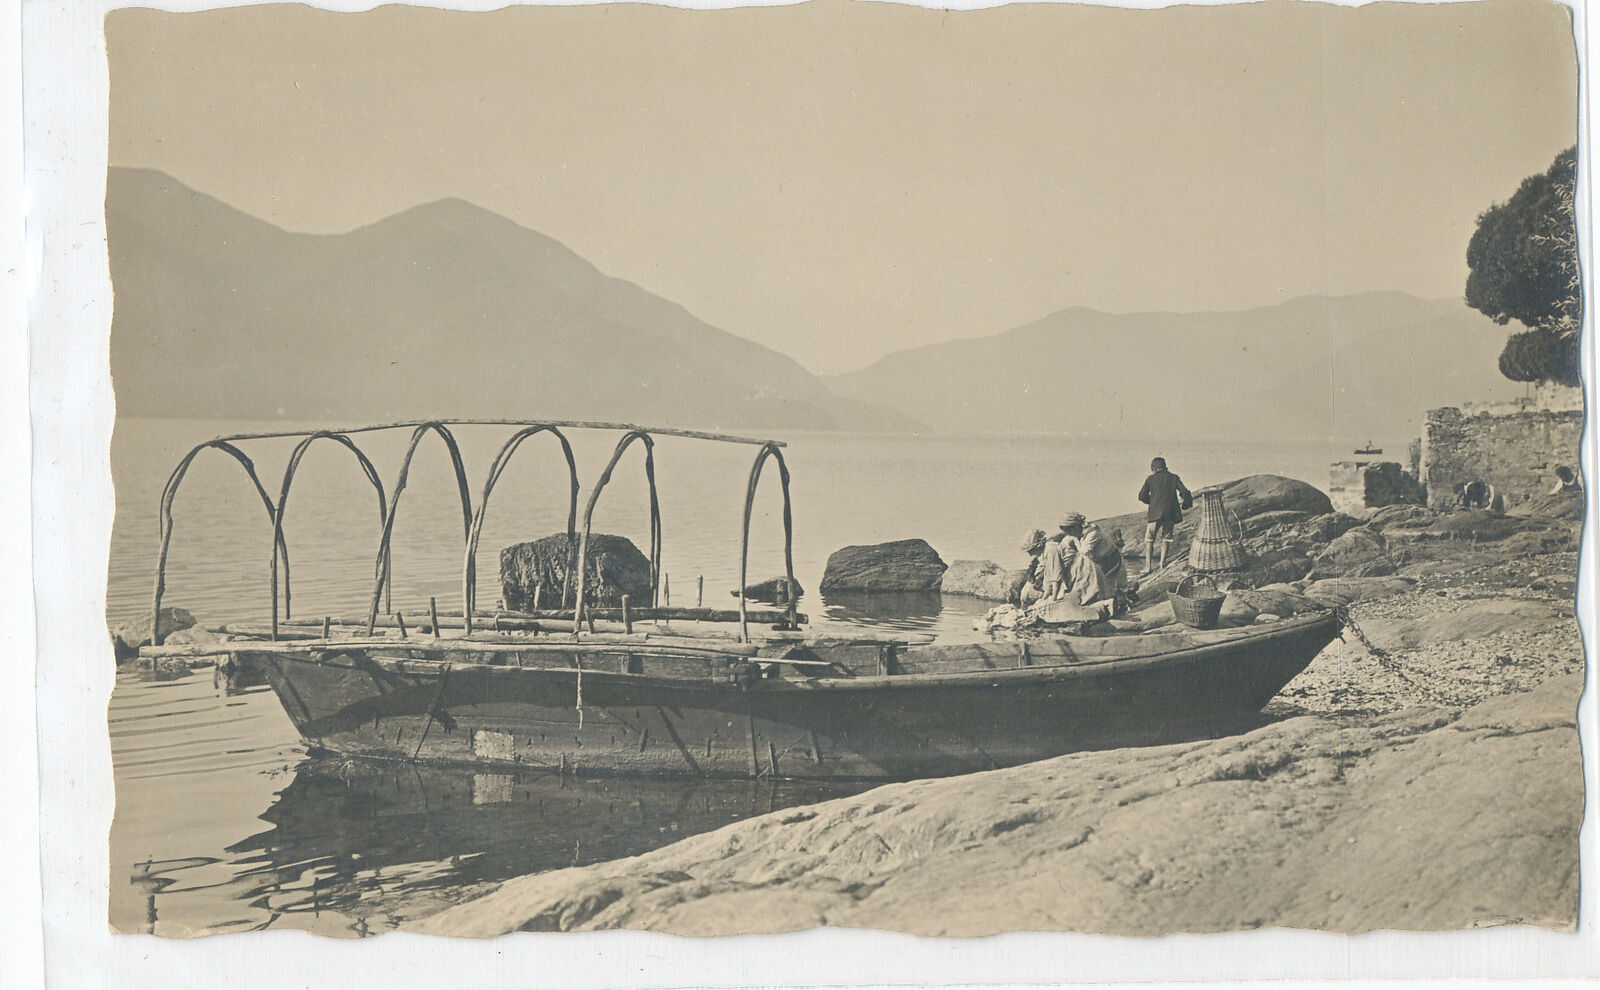 BOAT DOCKED ON BEACH - PEOPLE IN BACKGROUND postcard